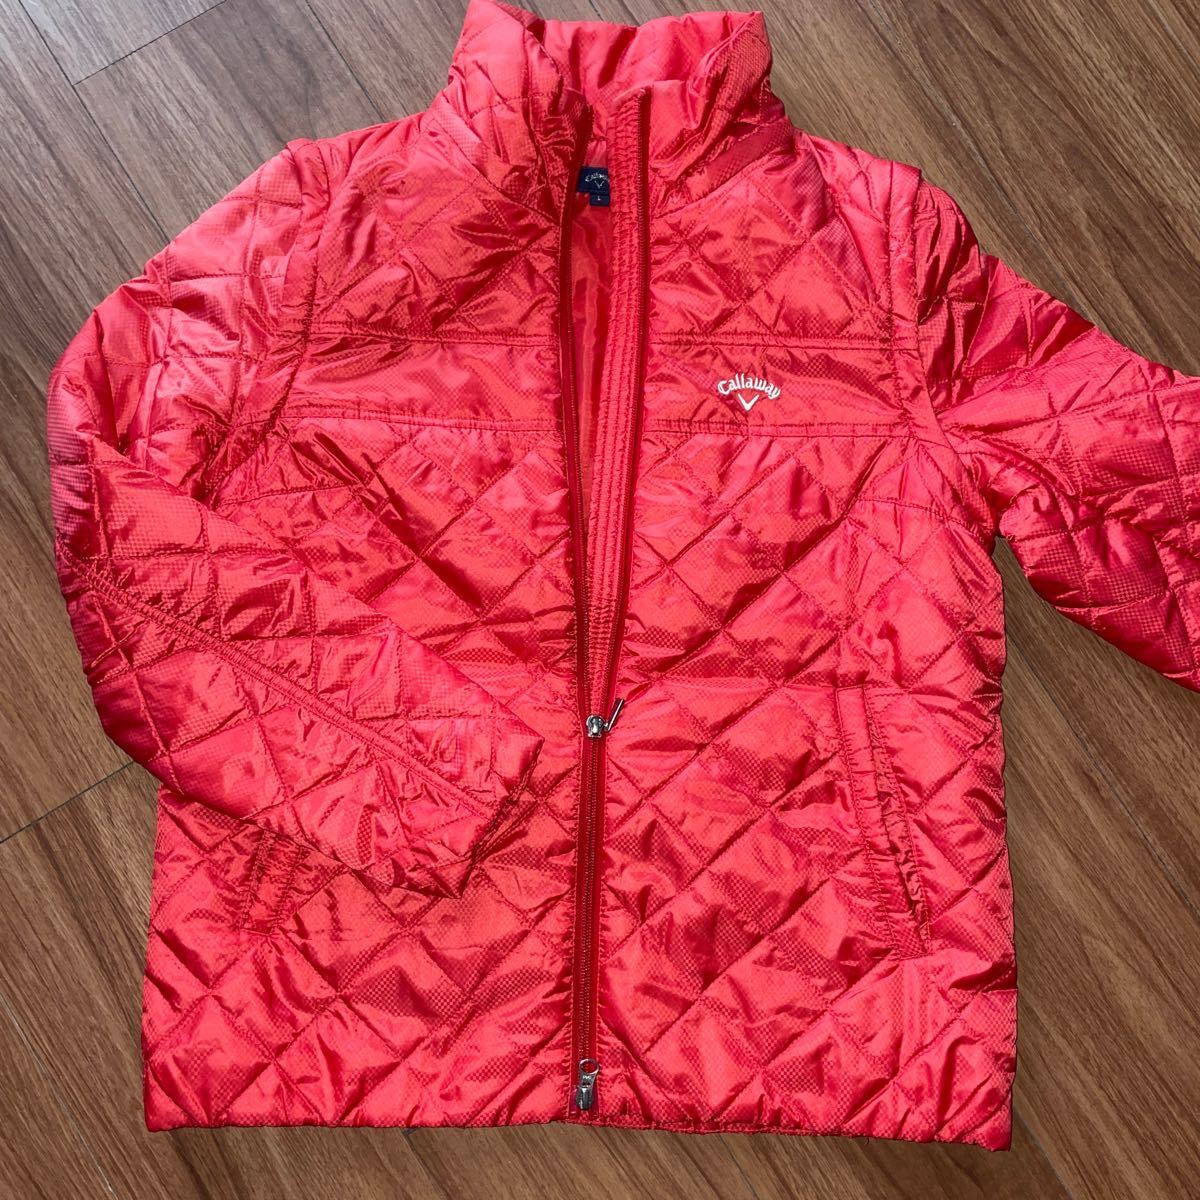  prompt decision!#Callaway Callaway GOLF lady's cotton inside setup 2WAY jacket the best skirt L# red red double Zip up 